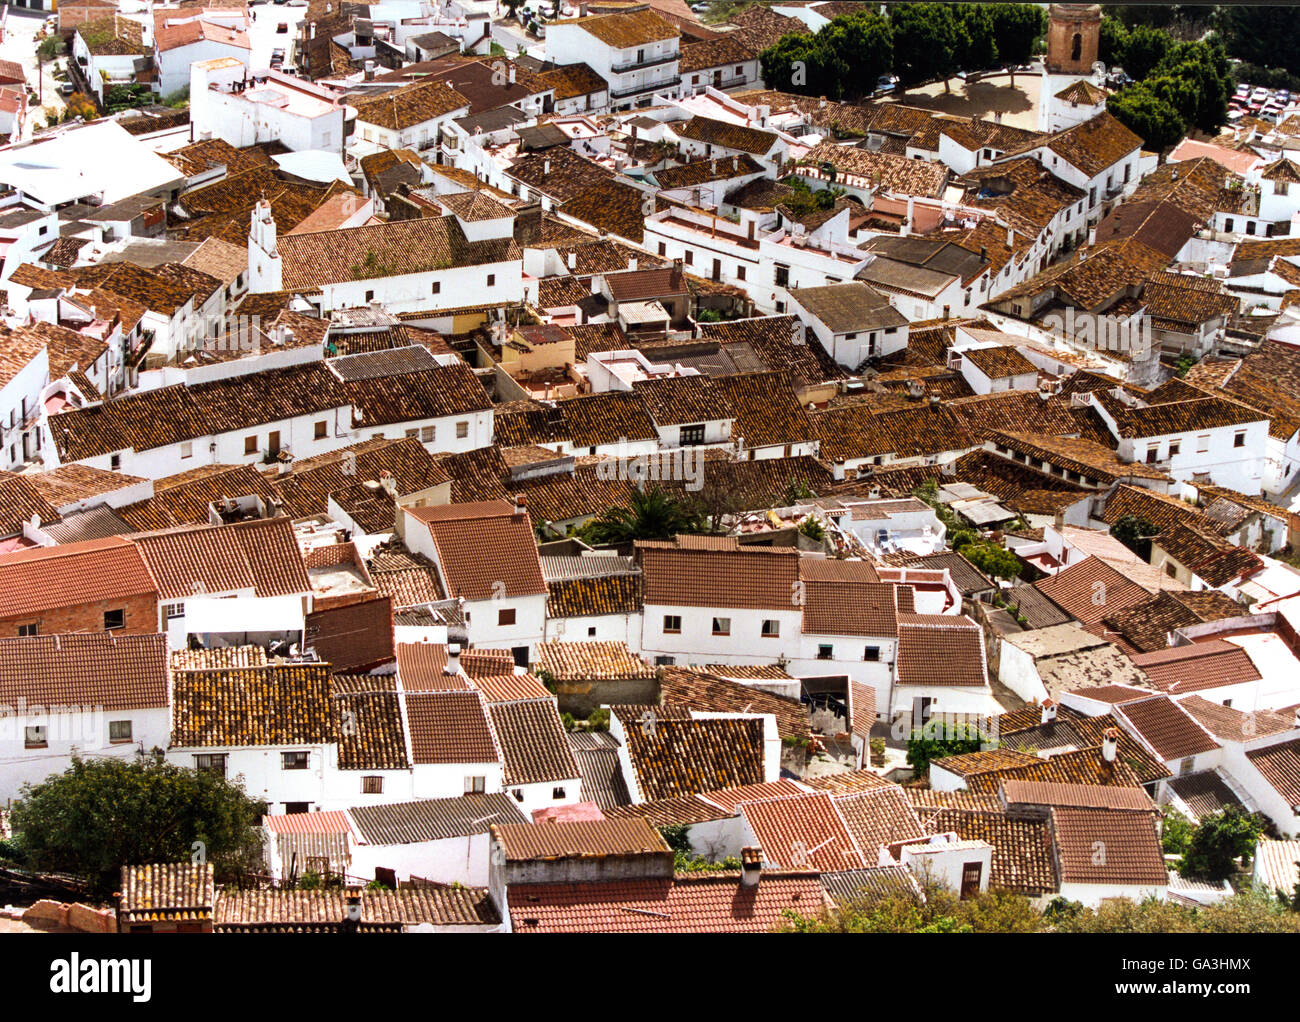 Rooftops seen from above,among the maze of houses Stock Photo